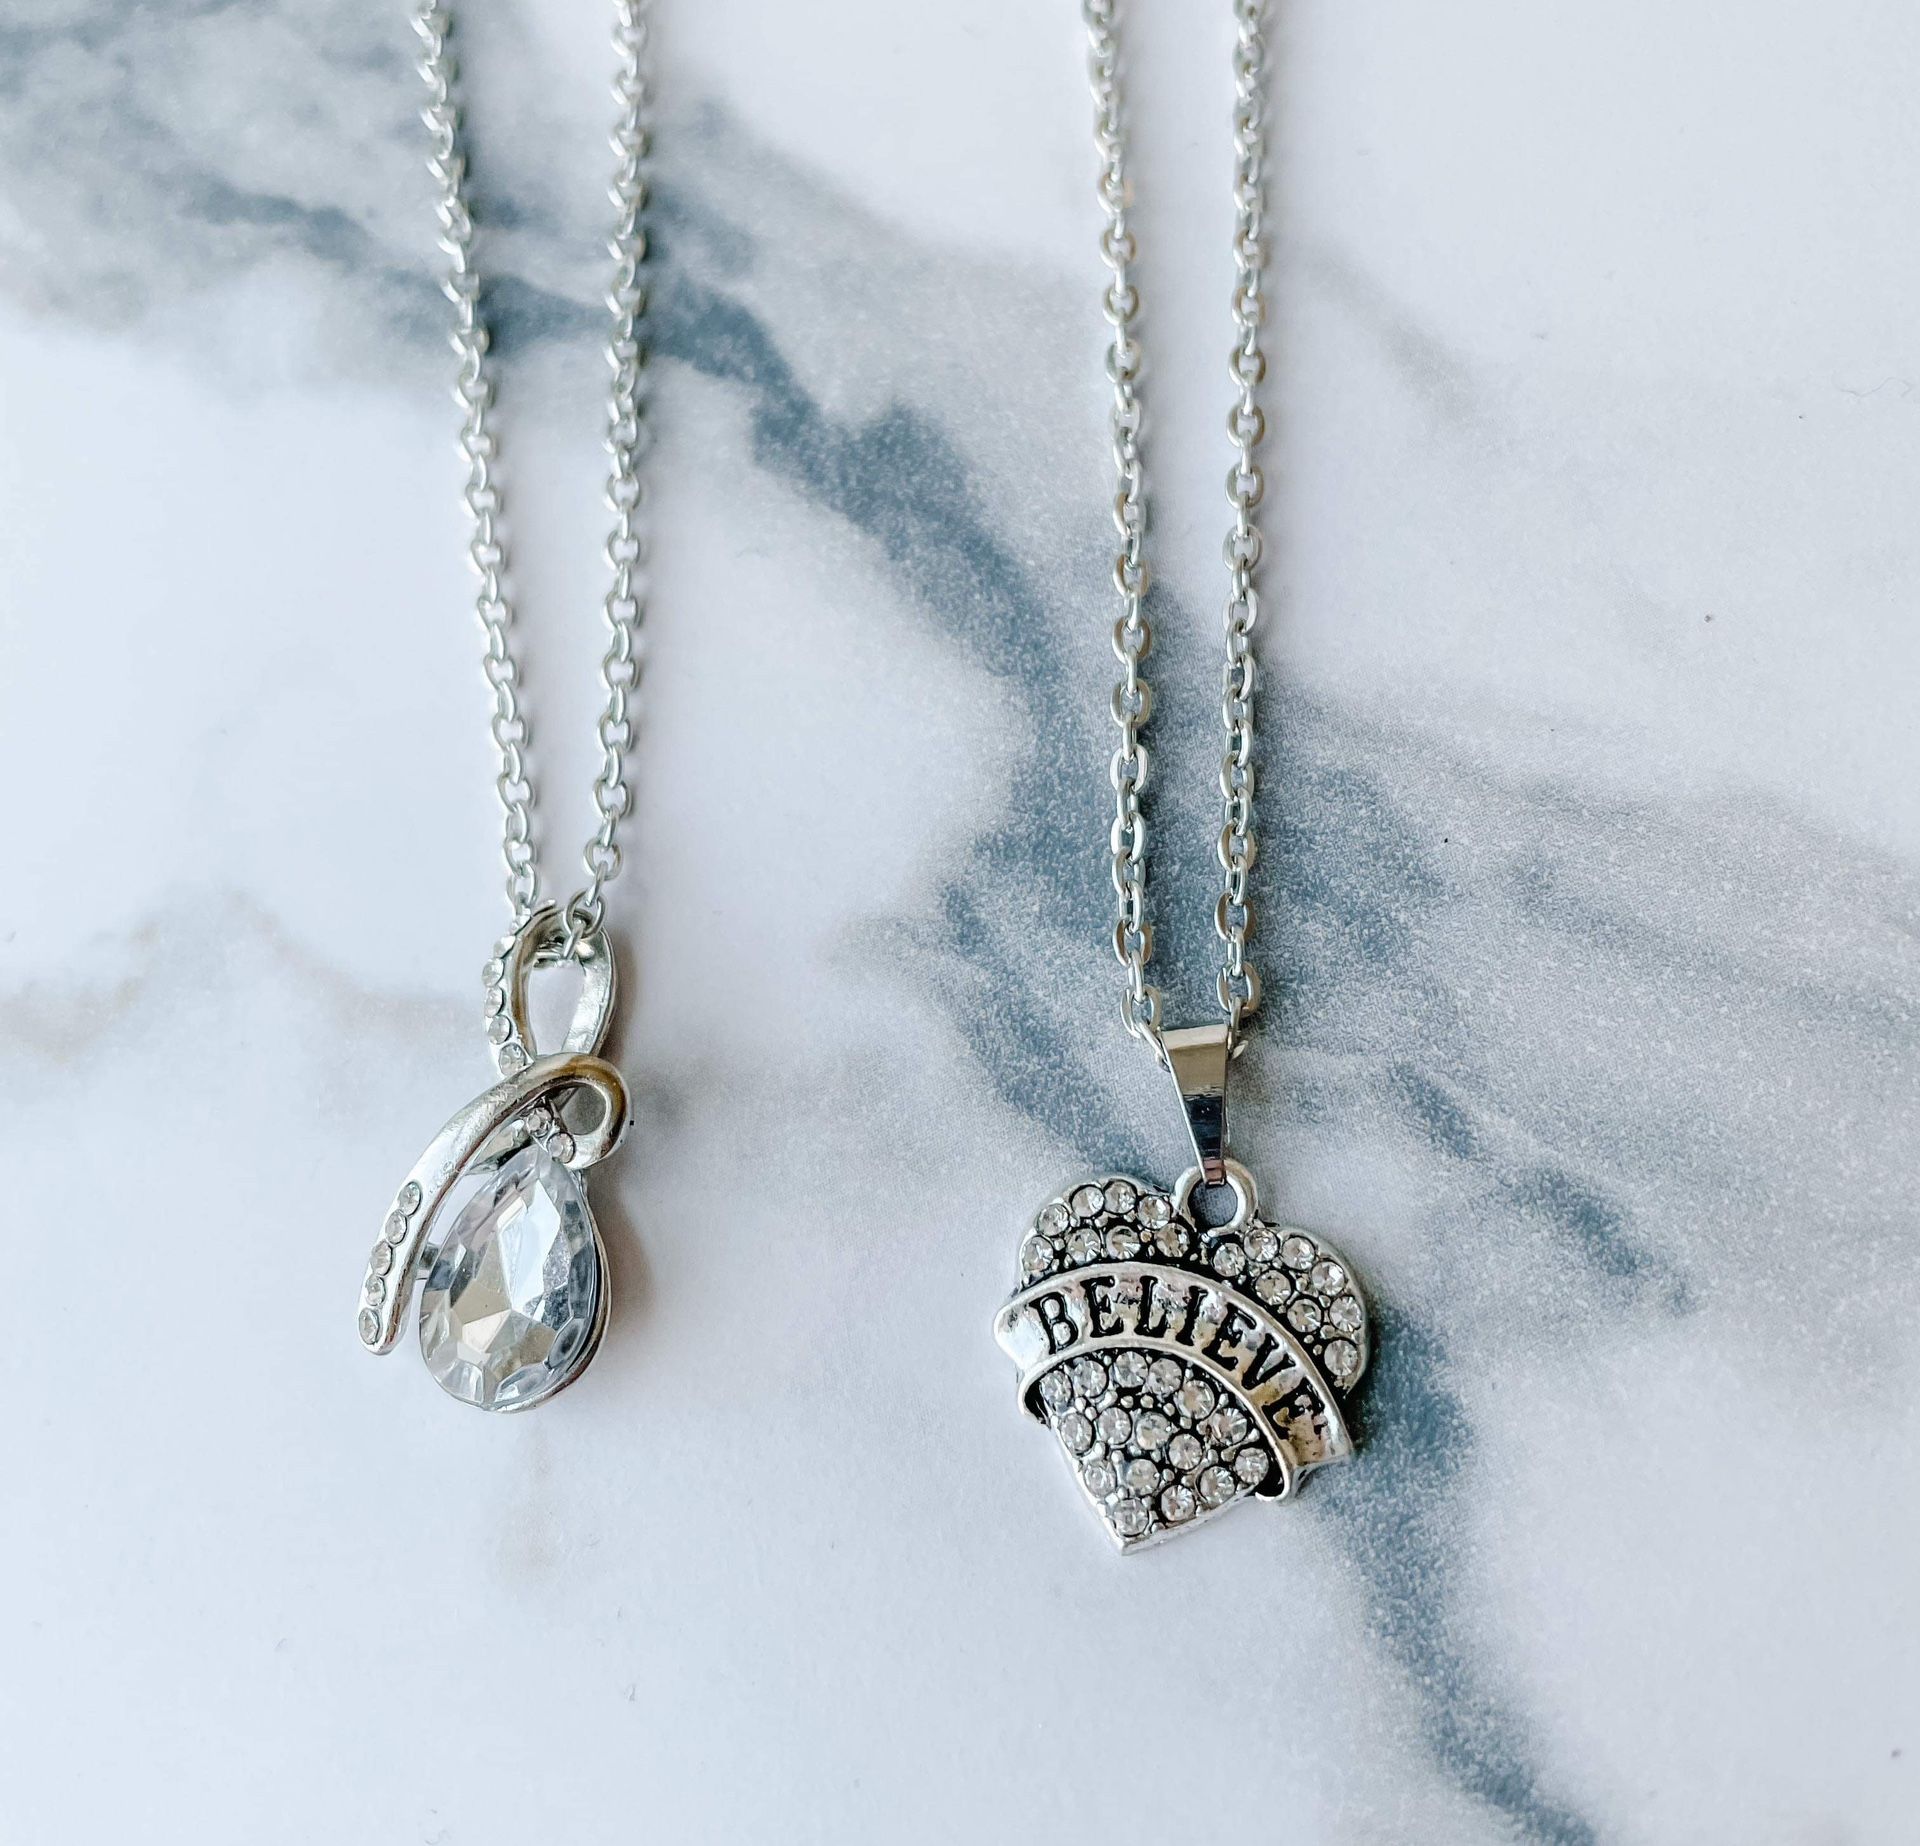 Two silver Tone necklaces with white crystals/faux diamonds